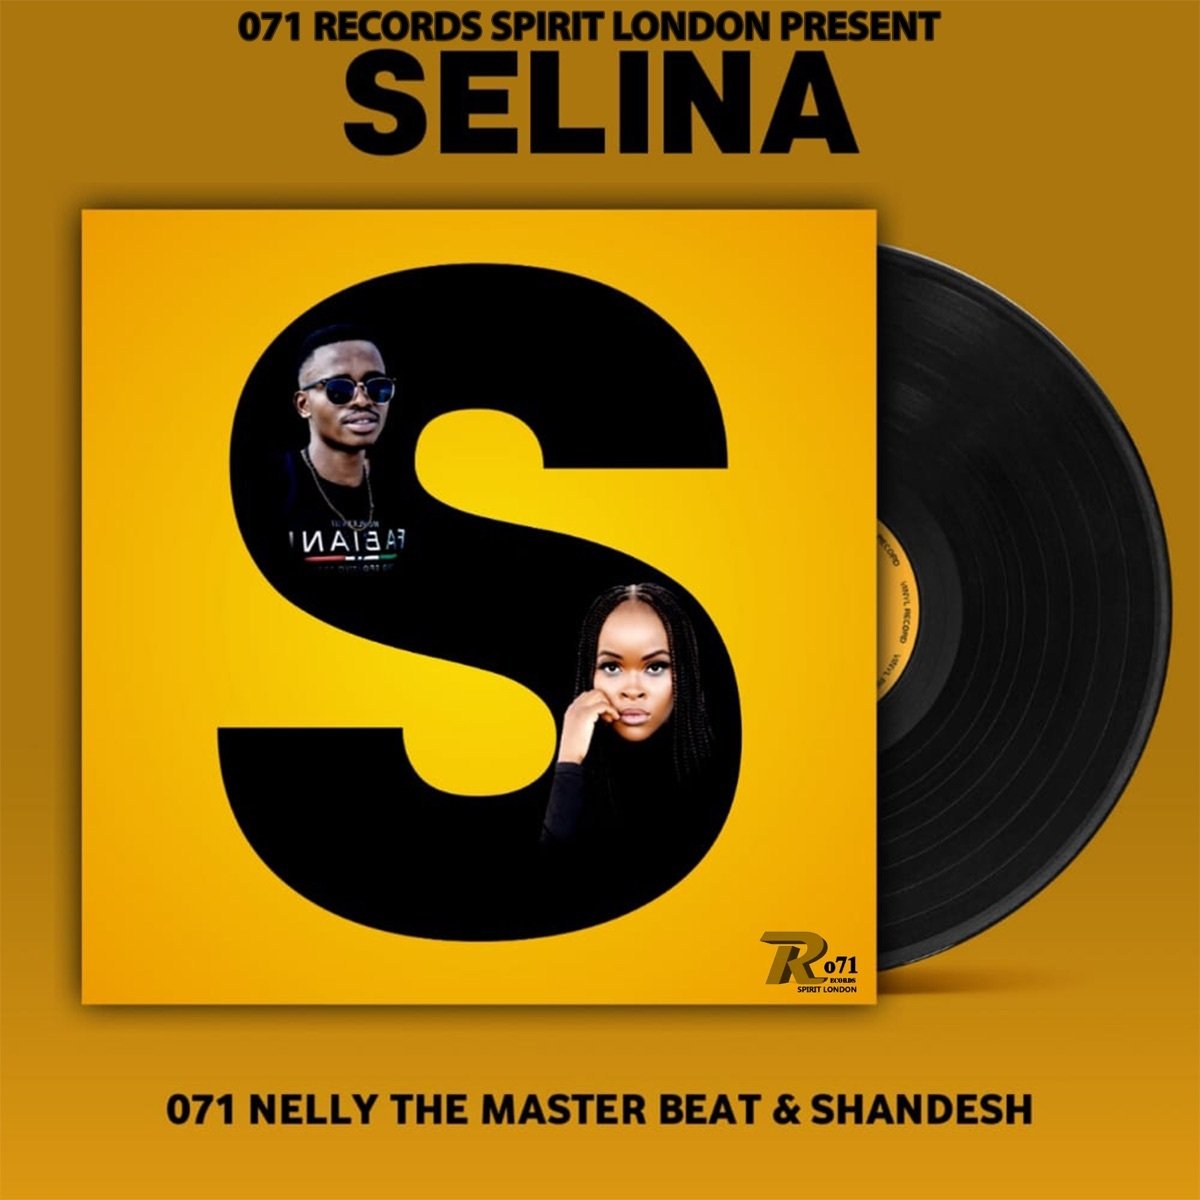 Selina - 071 Nelly The Master beat & Shandesh@071records.com